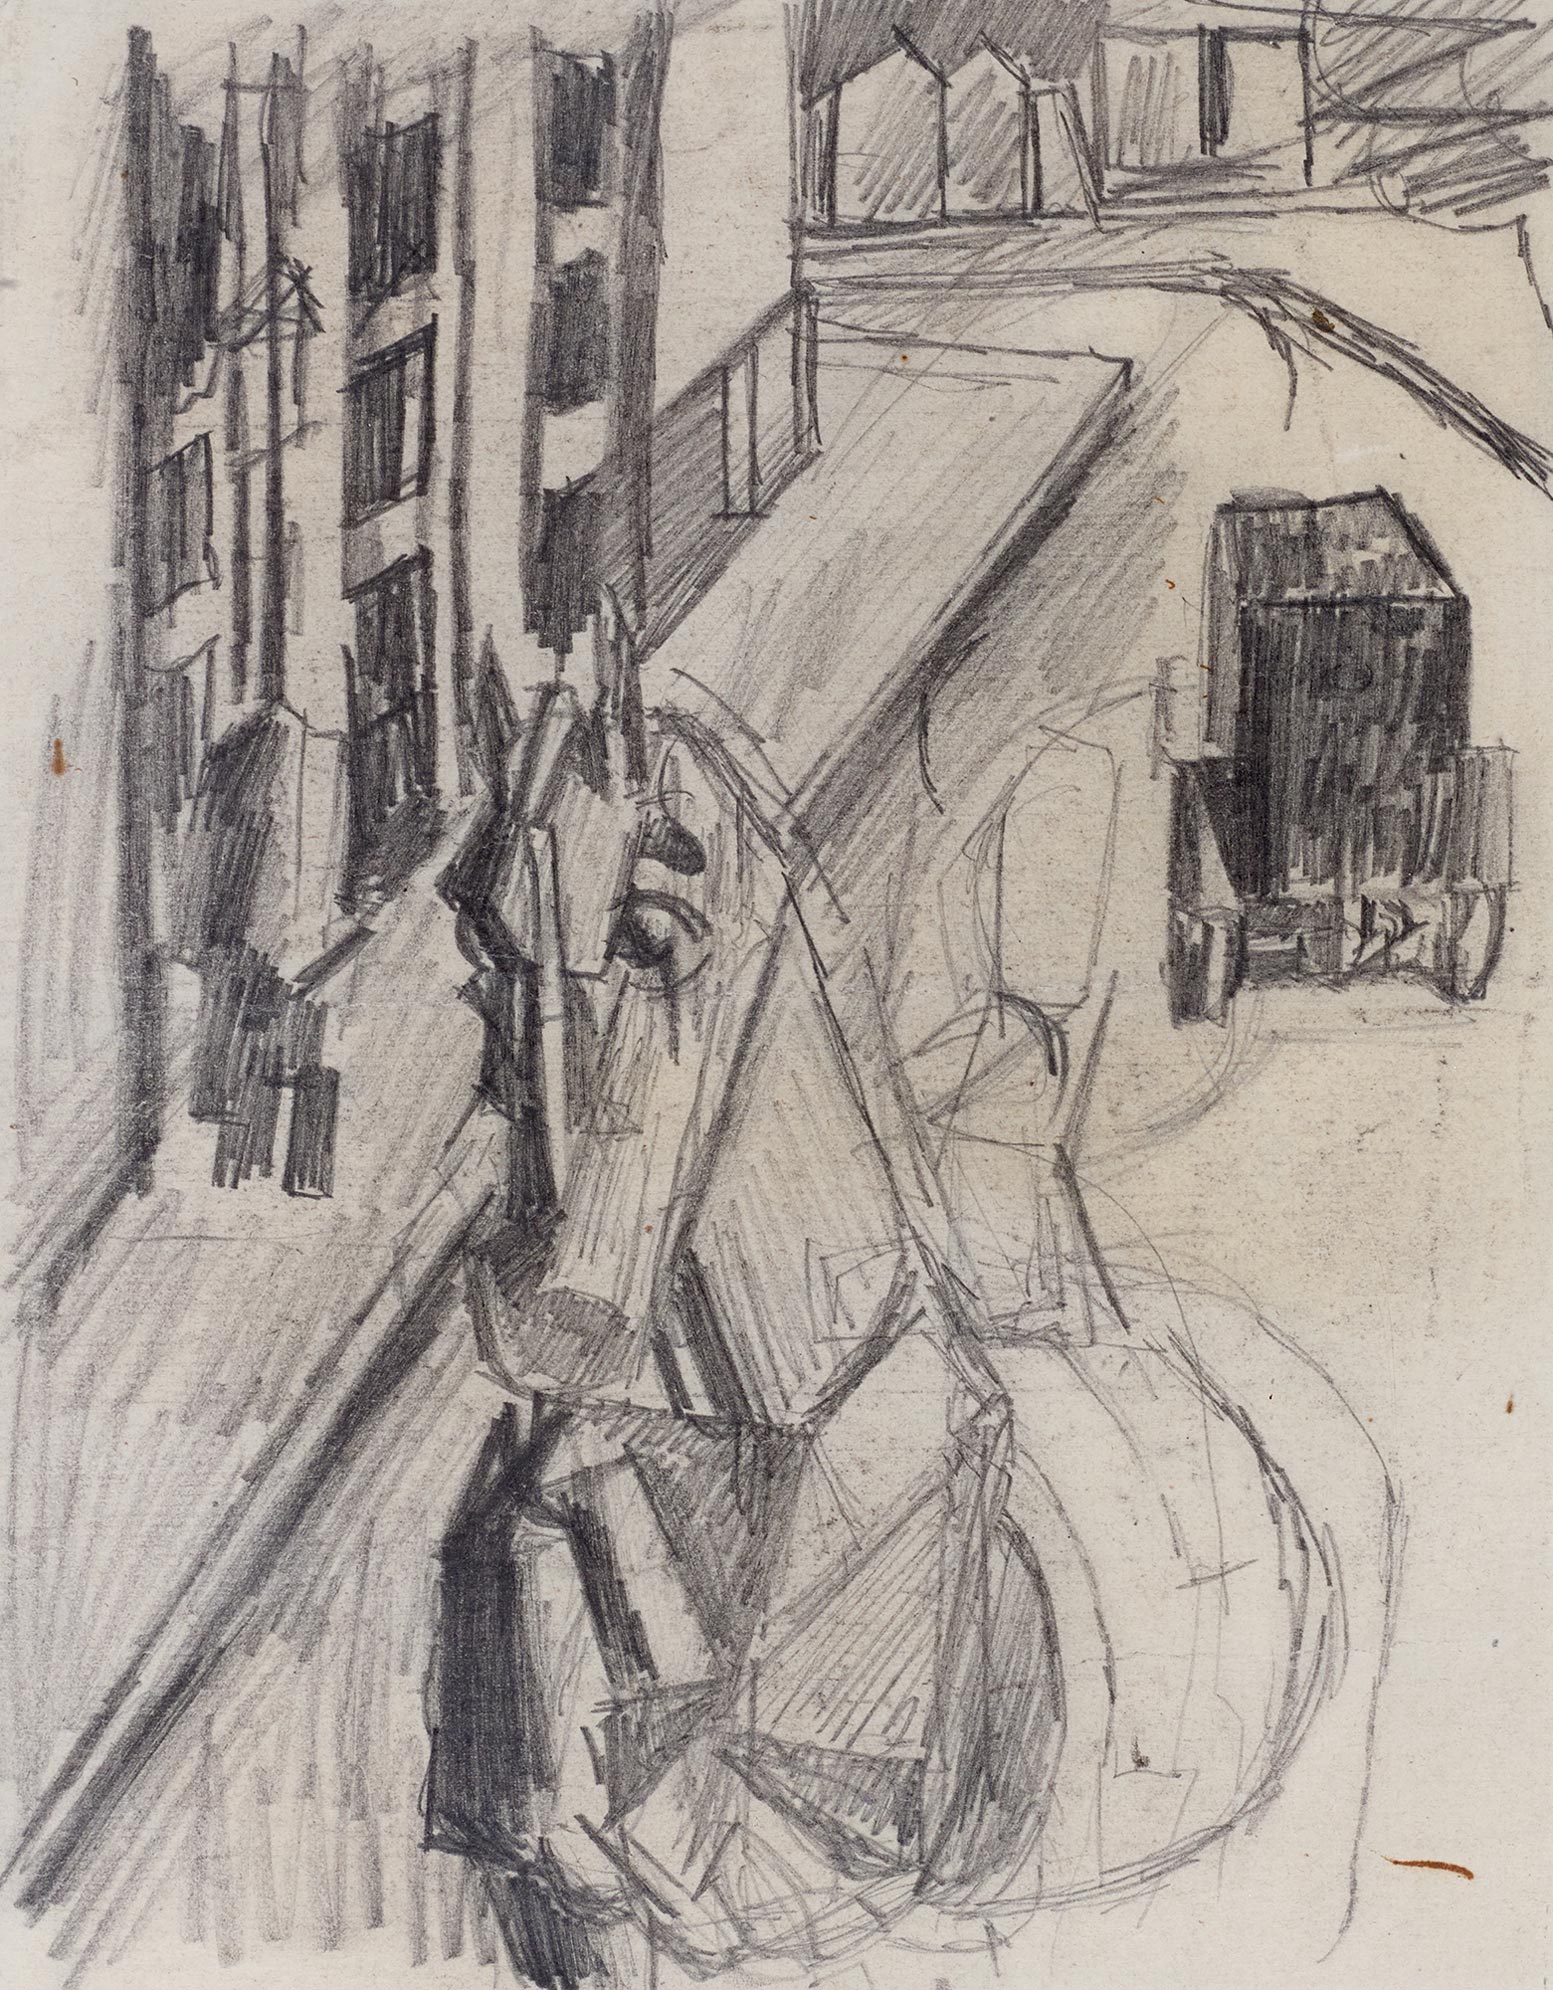 Mario Sironi, Horse and Carriage in a Street, 1917-18